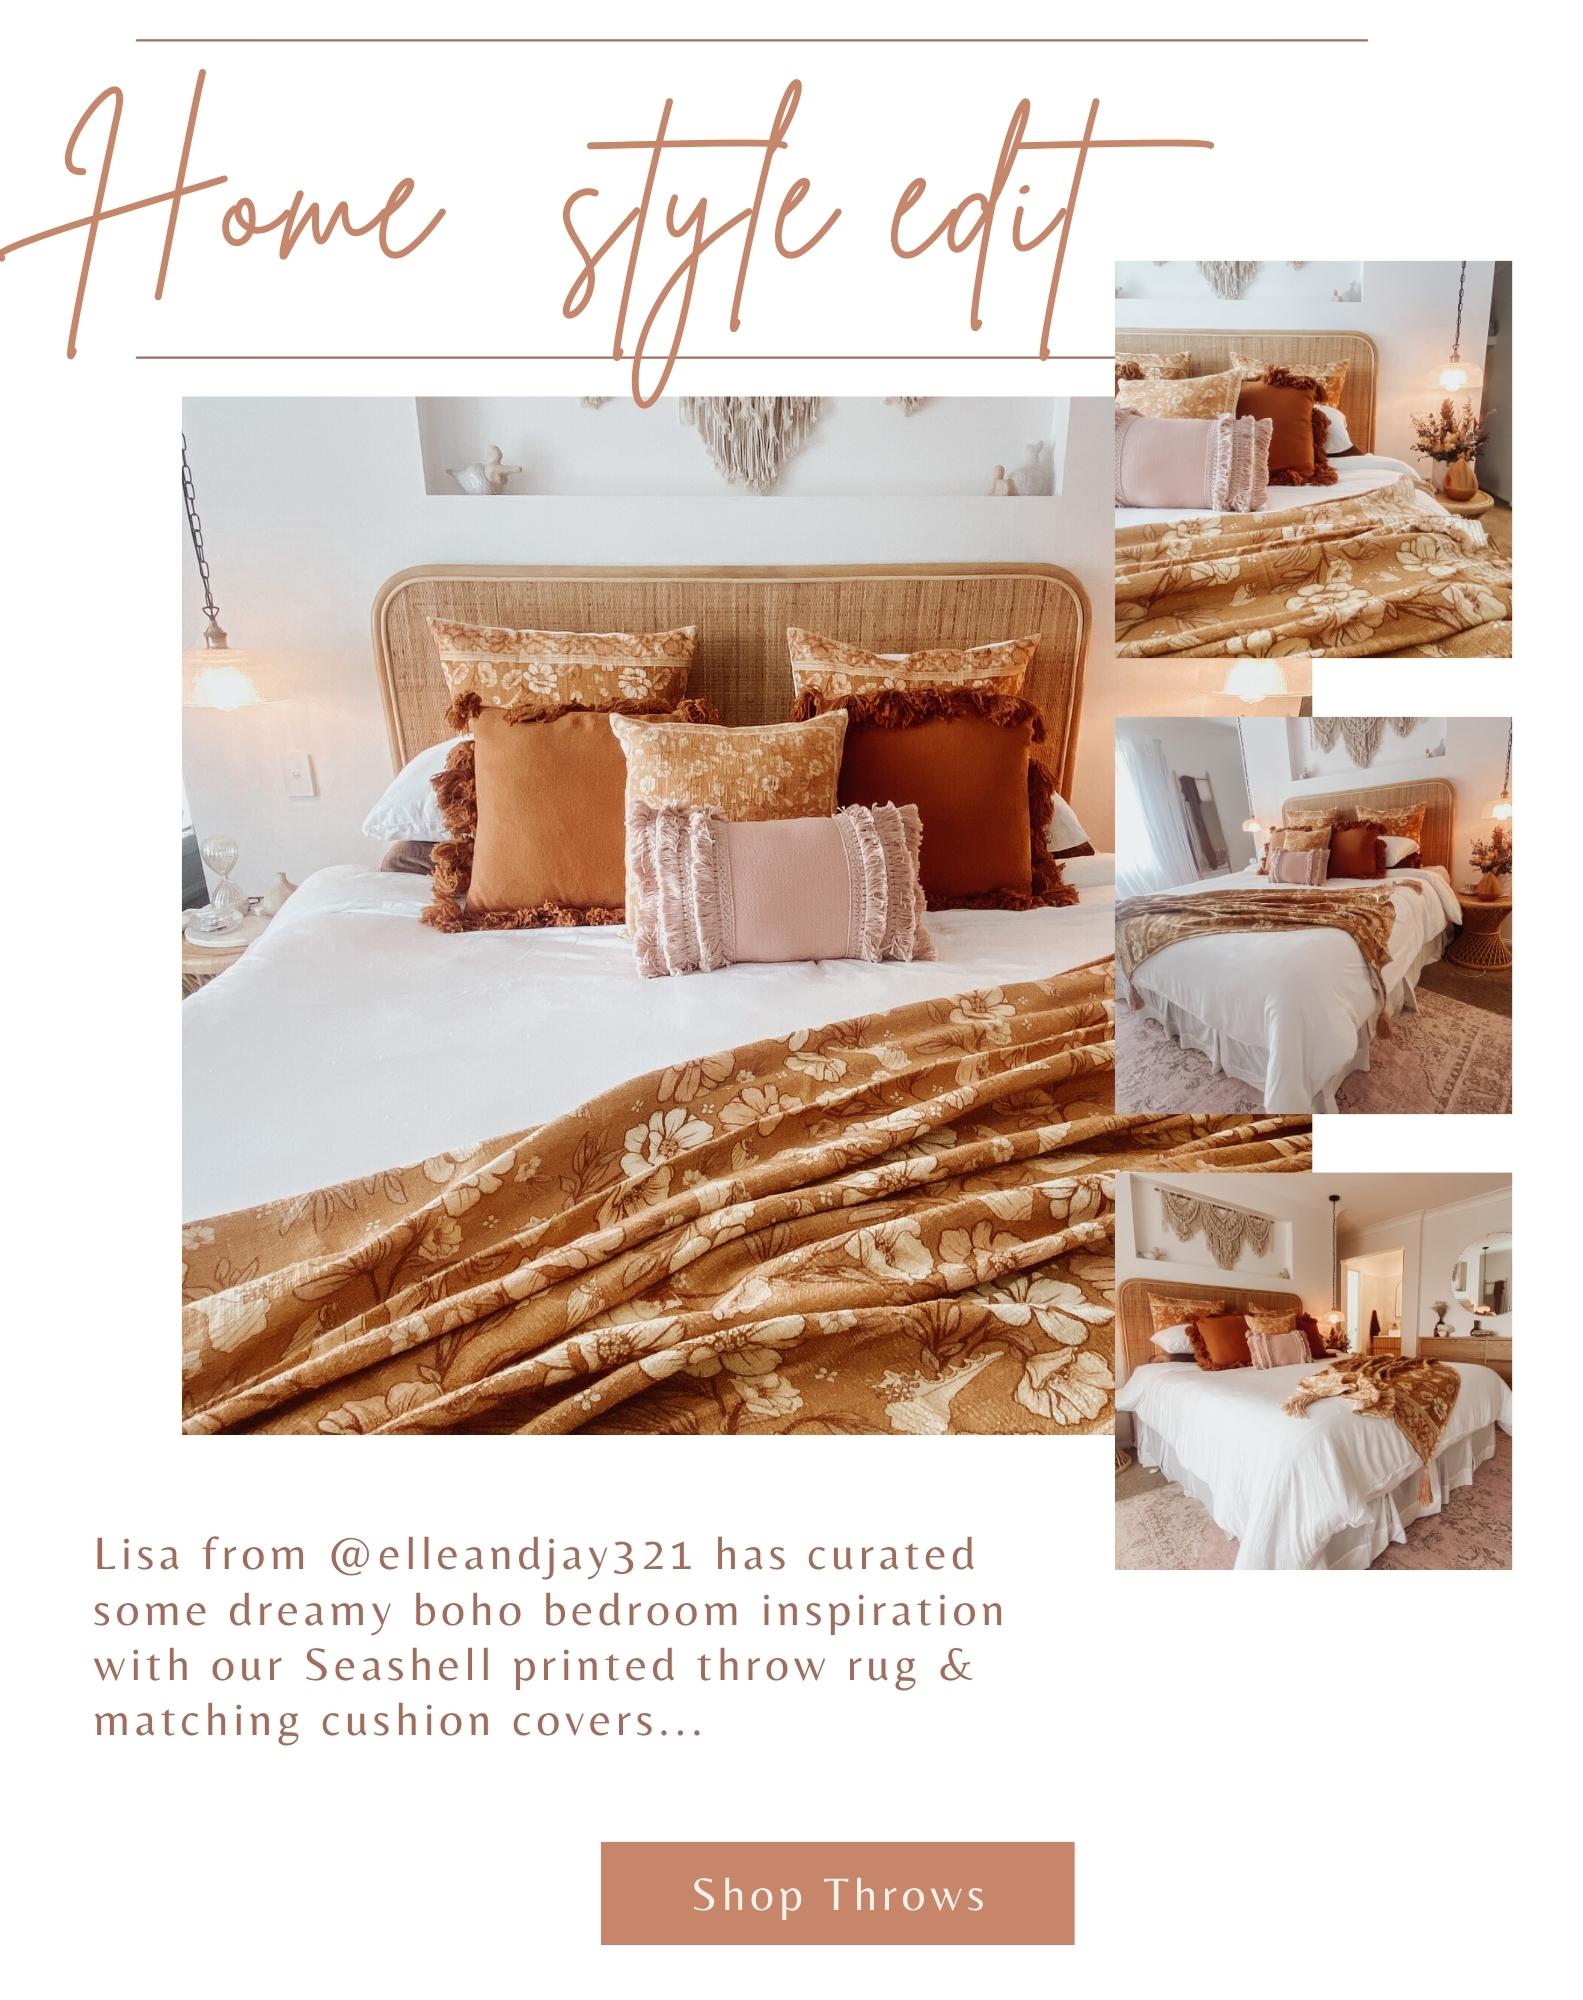 Lisa from @elleandjay321 has curated some dreamy boho bedroom inspiration with our Seashell printed throw rug & matching cushion covers...